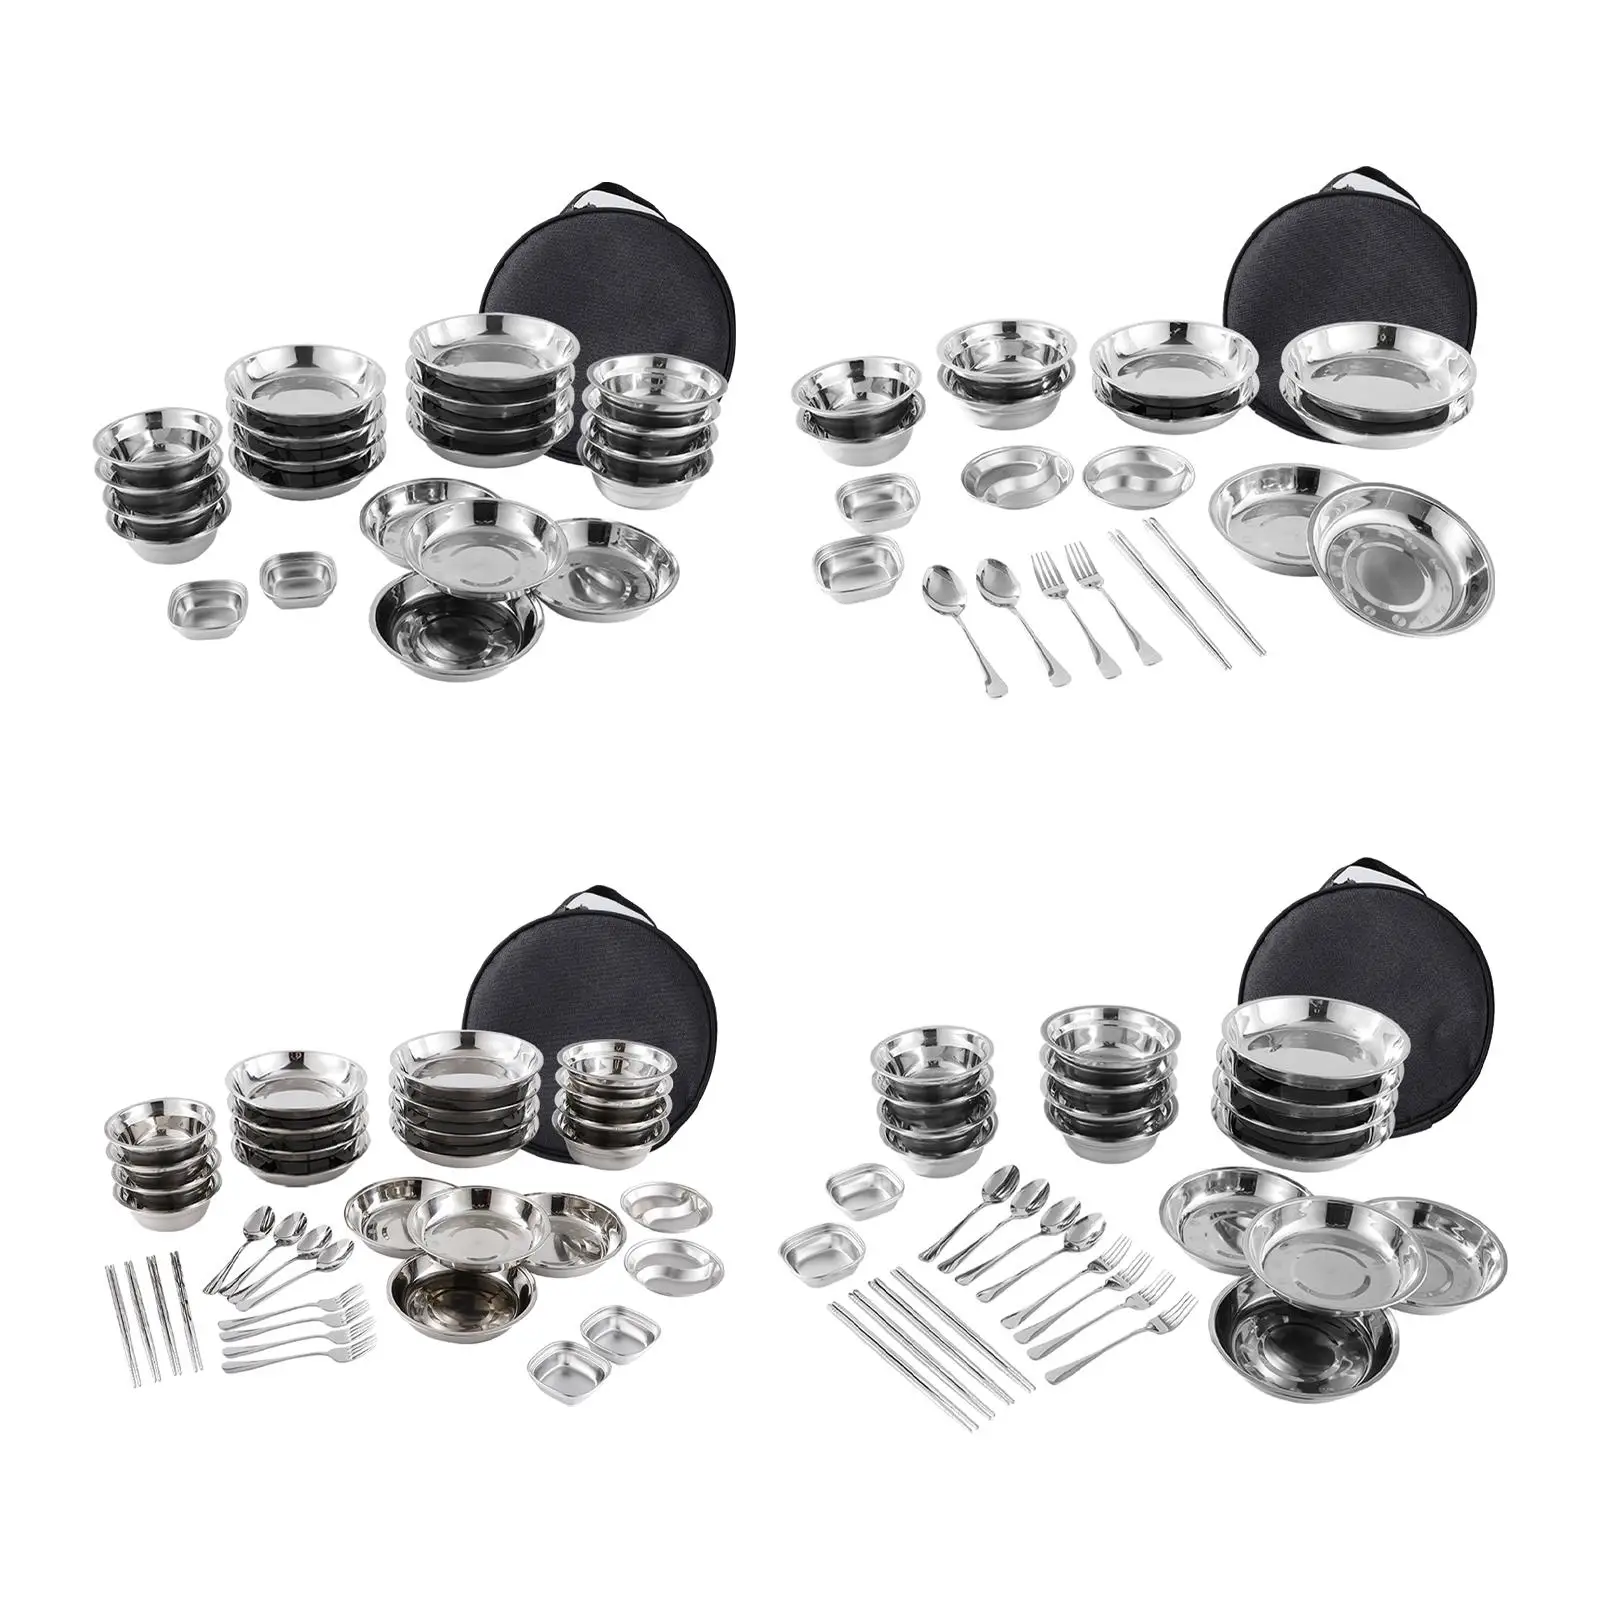 Stainless Steel Plates and Bowls Camping Set Dinner Plate Camping Mess Set for